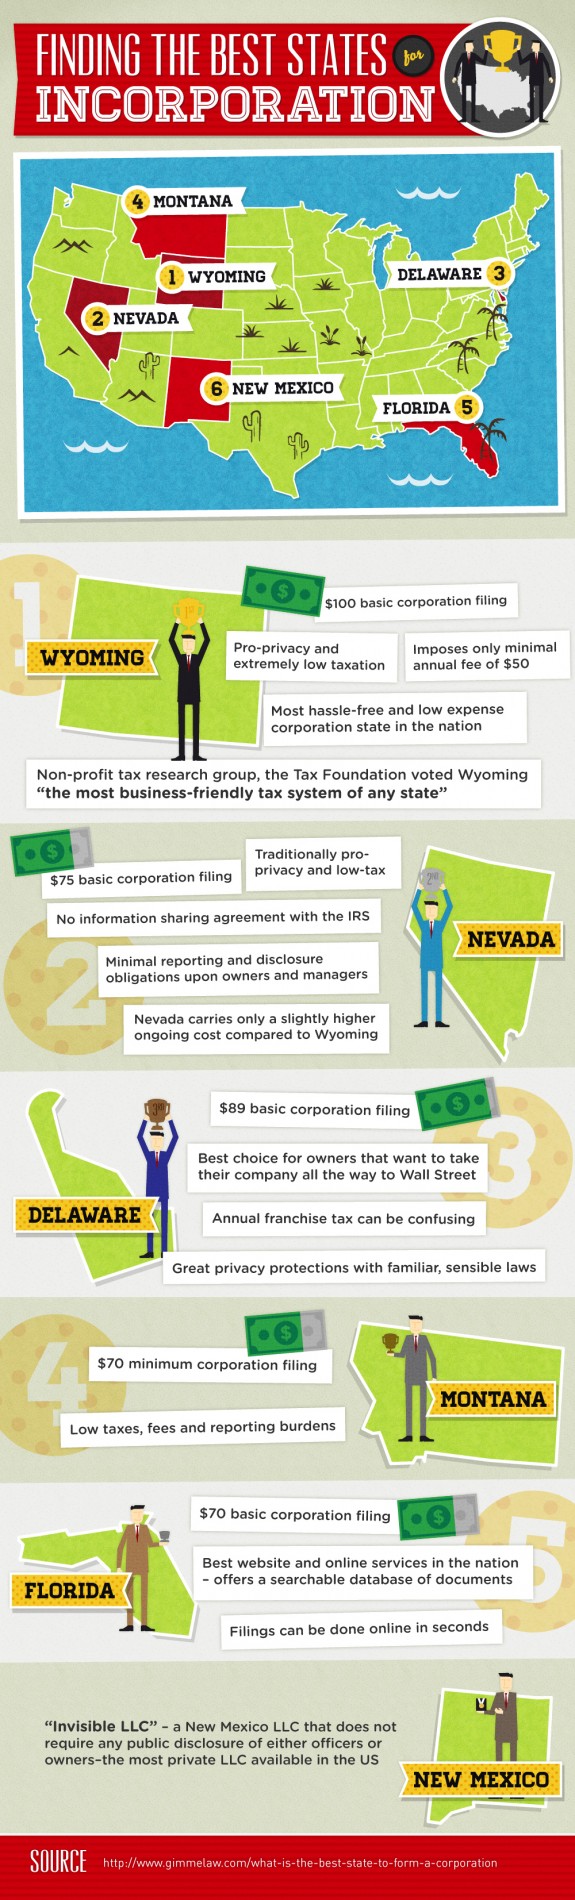 Infographic for Finding The Best States for Incorporation Infographic